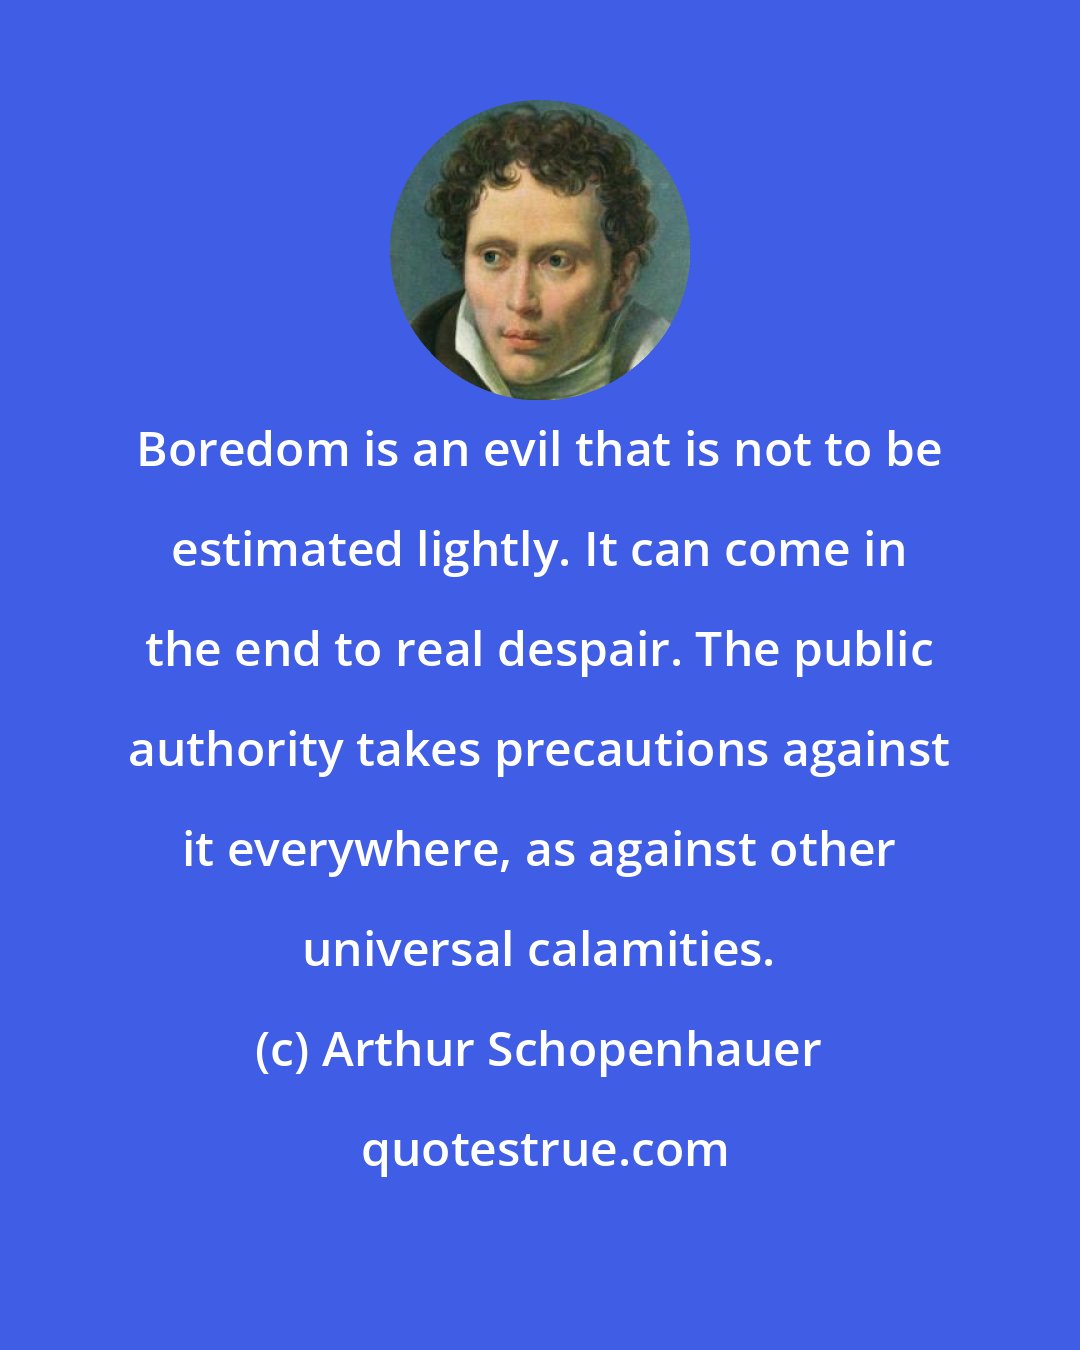 Arthur Schopenhauer: Boredom is an evil that is not to be estimated lightly. It can come in the end to real despair. The public authority takes precautions against it everywhere, as against other universal calamities.